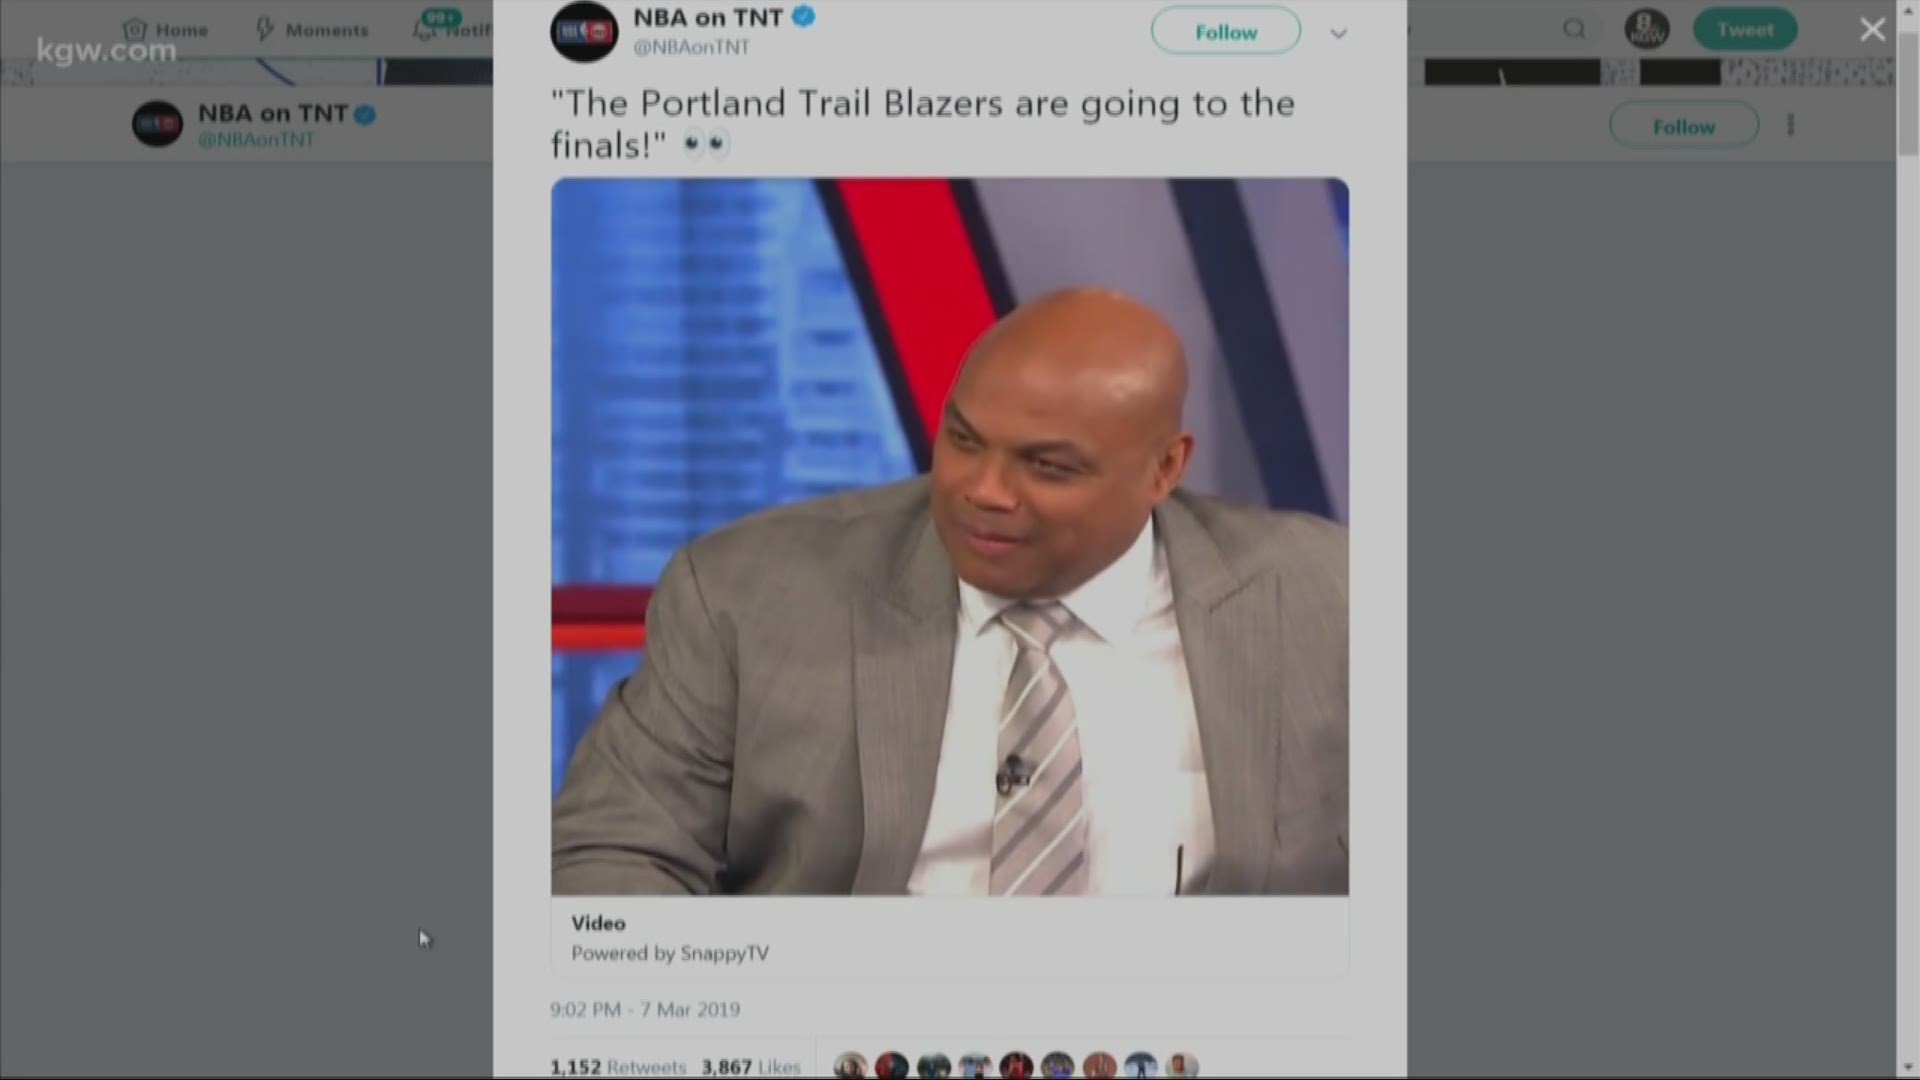 Charles Barkley made a bold prediction during halftime of the Blazers-Thunder game on TNT.